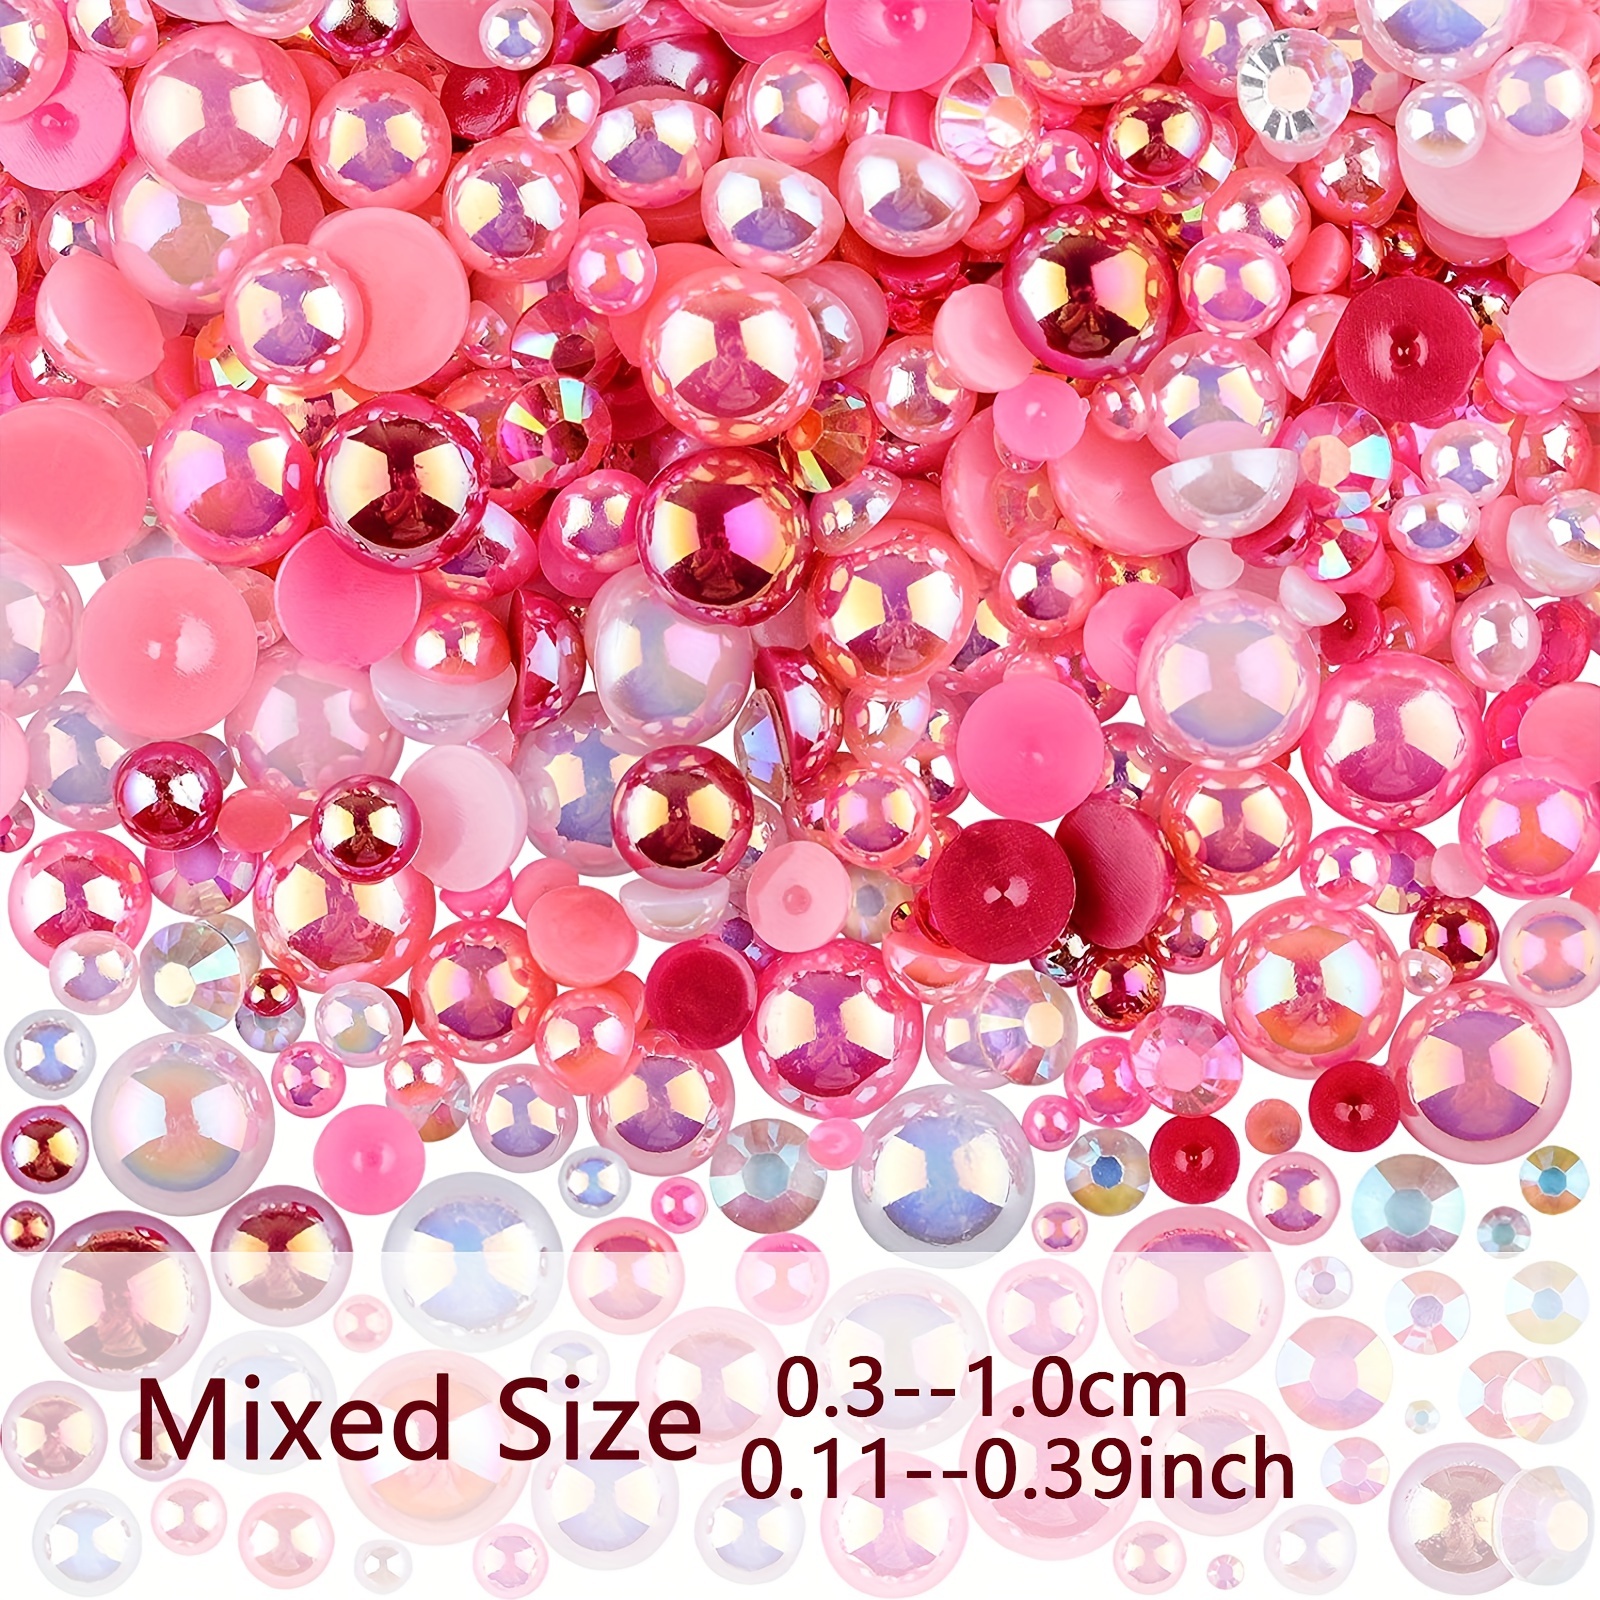 Towenm 60g Mix Flatback Pearls and Rhinestones, 2mm-10mm Jelly Rhinestones  and Half Pearls for Tumblers Shoes Nails Face Art, Pearl Rhinestone Mix for